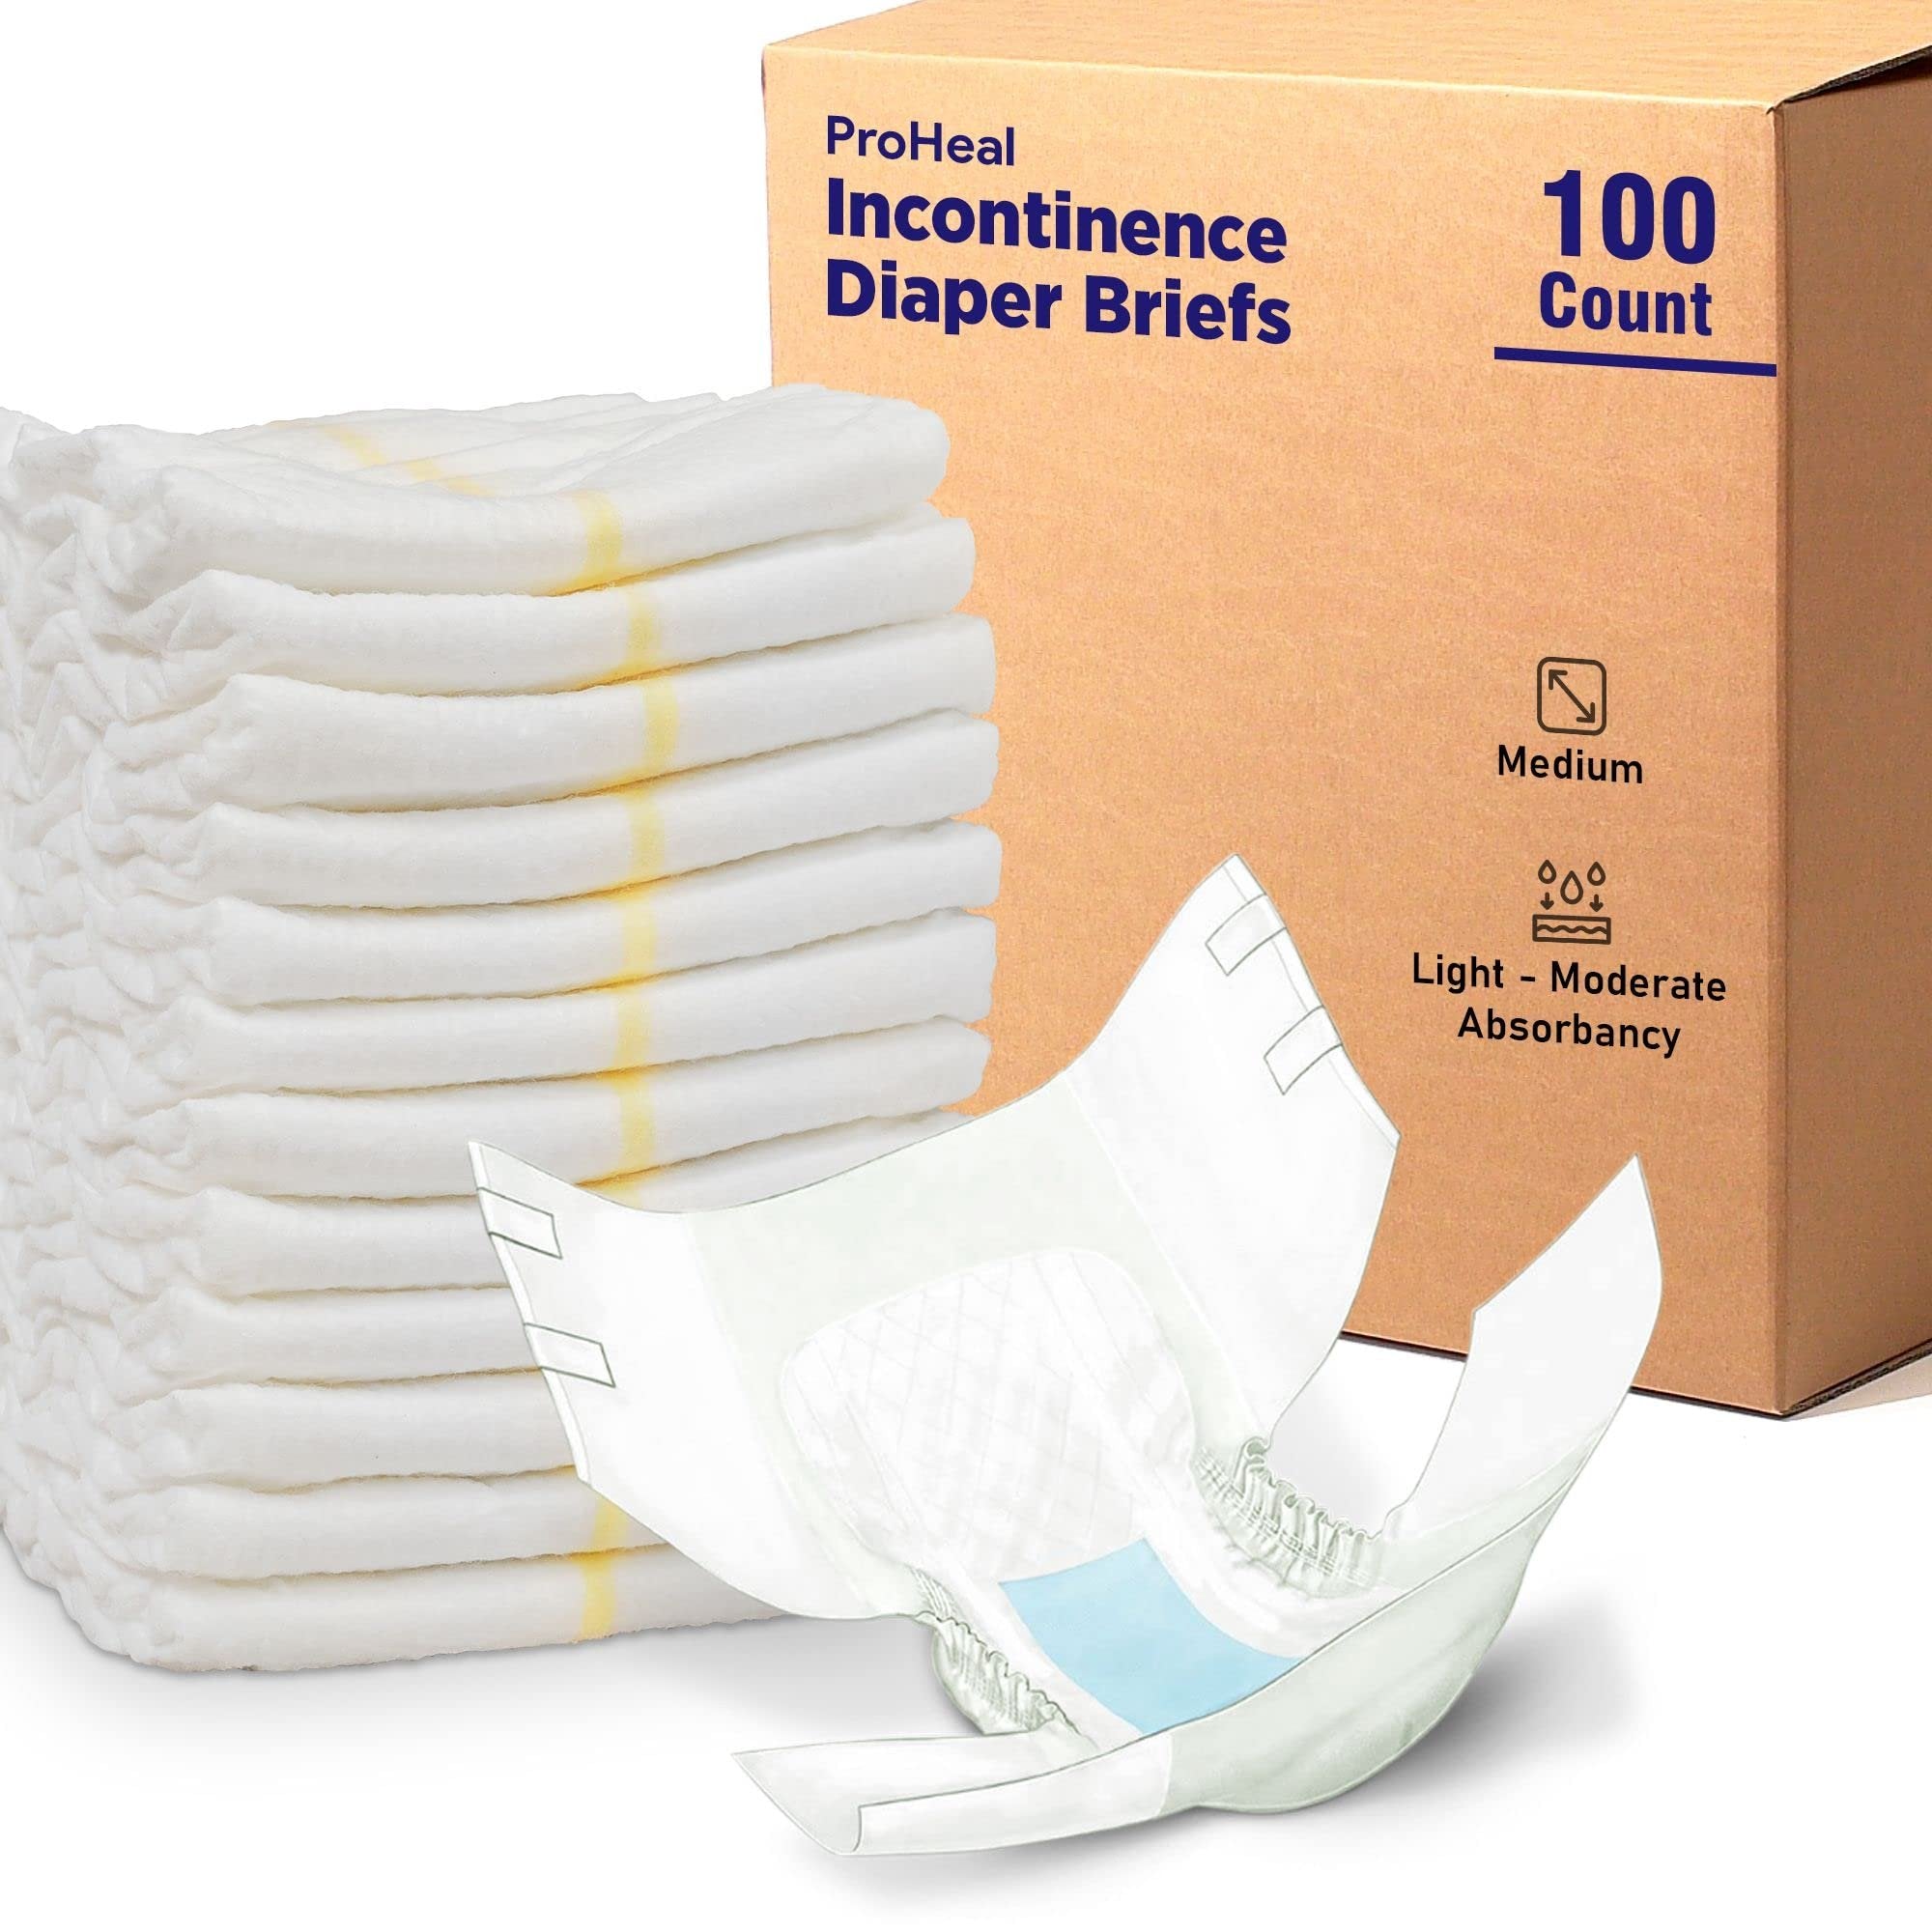 Adult Diapers Incontinence Briefs Medium, 10 Pack - for Men and Women - Quilted Moisture and Odor Lock - Light-Moderate Absorbency, Secure Fit Refastenable Tabs, Elastic Gathers